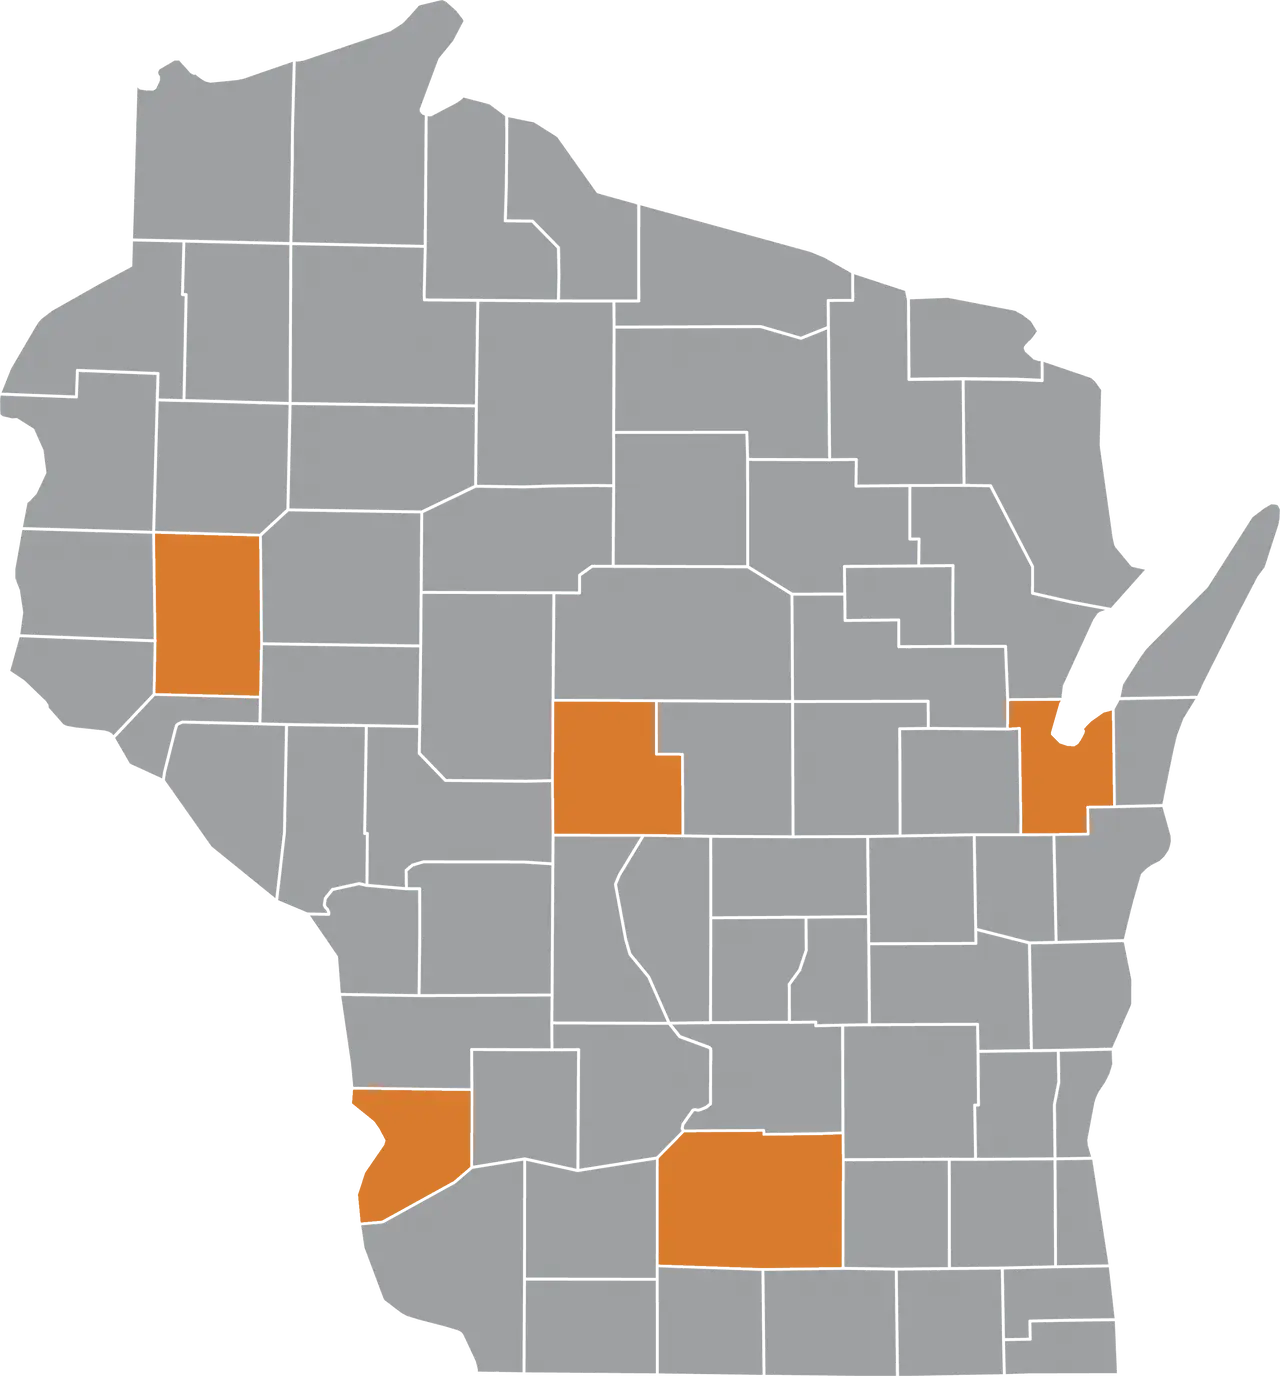 Leaders of the Land County Map